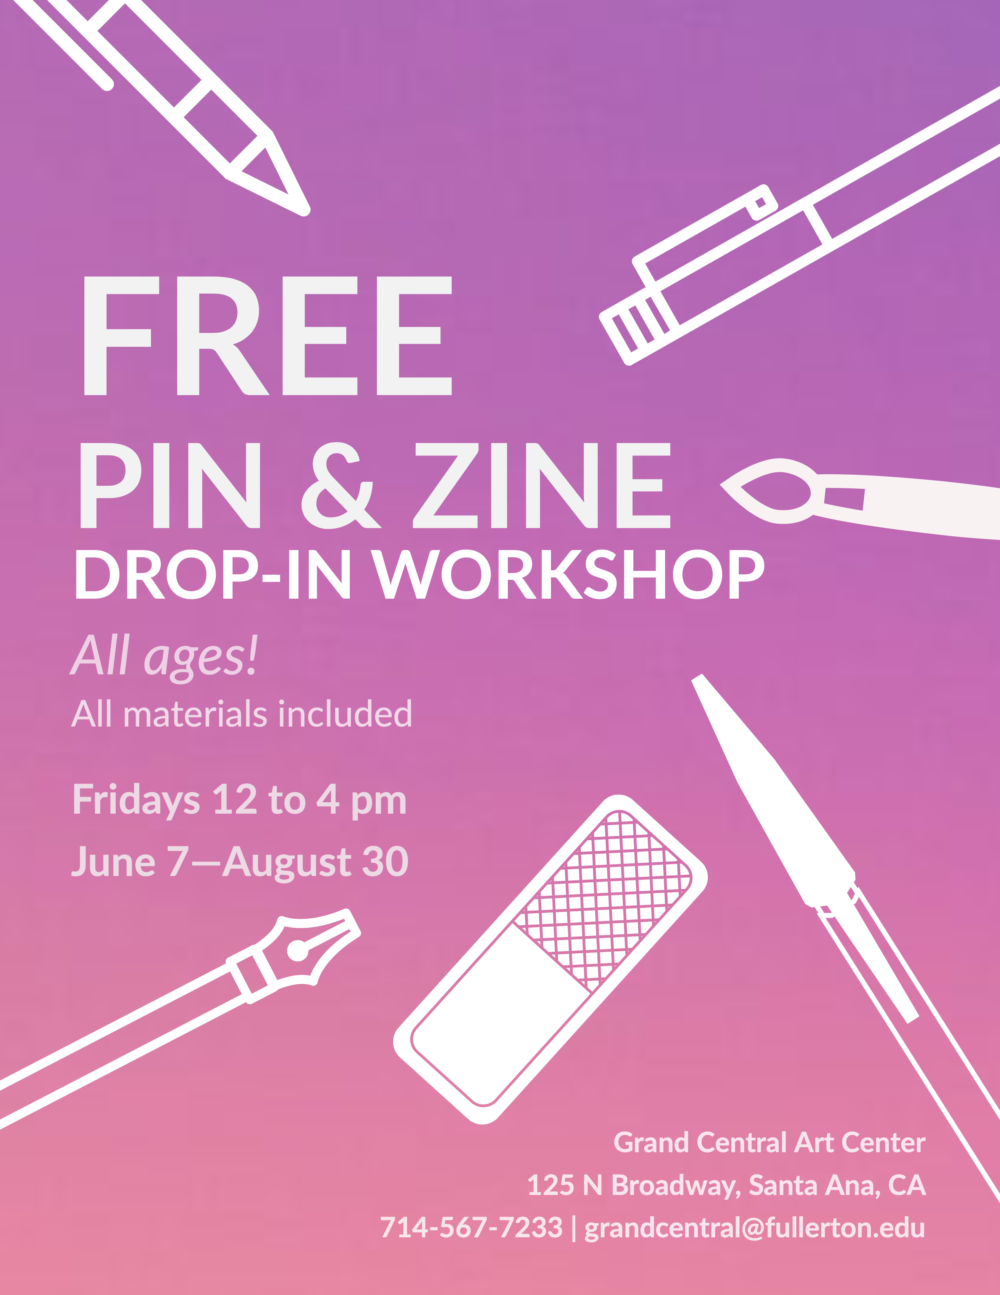 Flyer with text information with title of workshop "Free Pin & Zine Drop-In Workshop" on a purplish and pink gradient background.